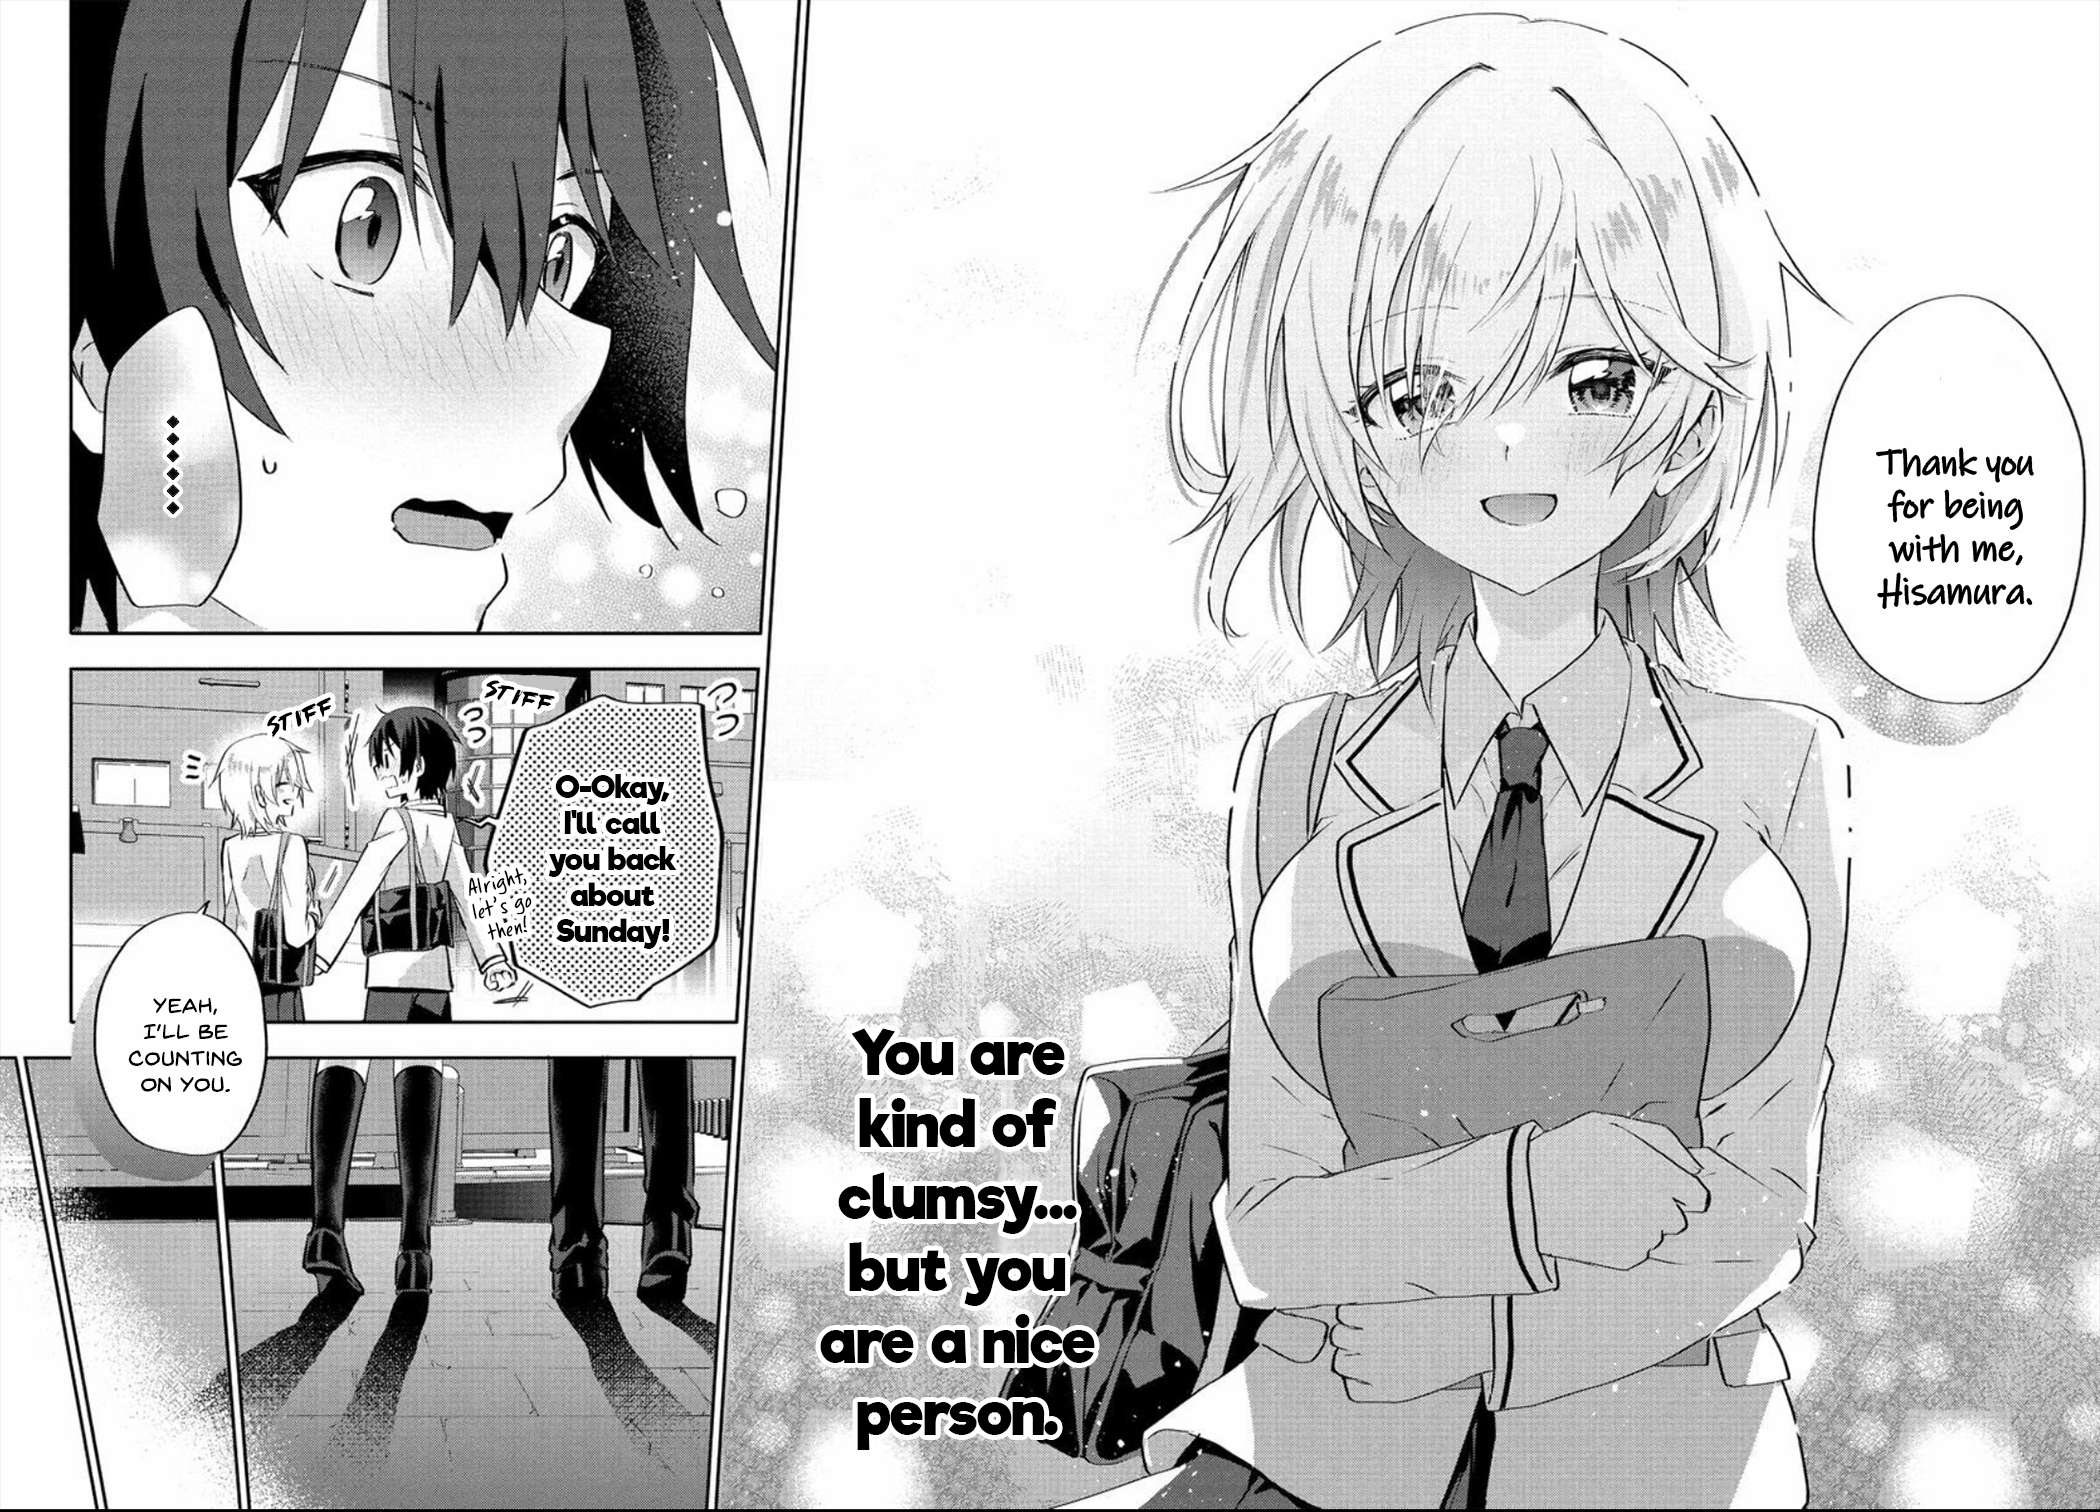 Since I’Ve Entered The World Of Romantic Comedy Manga, I’Ll Do My Best To Make The Losing Heroine Happy - chapter 5.2 - #3